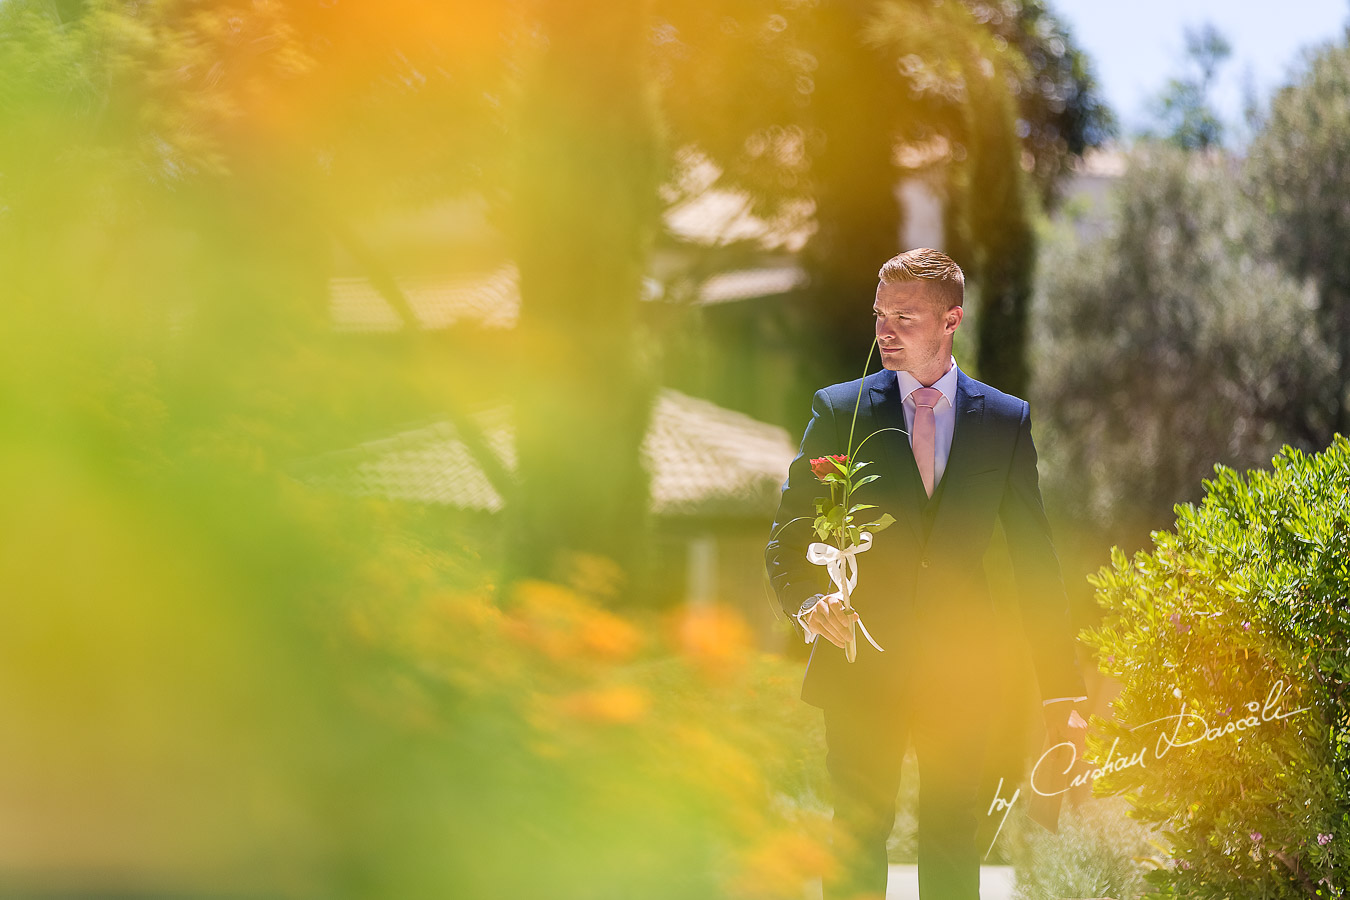 The Bestman delivering a flower and an envelop captured at Aphrodite Hills Resort before the wedding ceremony by Cristian Dascalu.